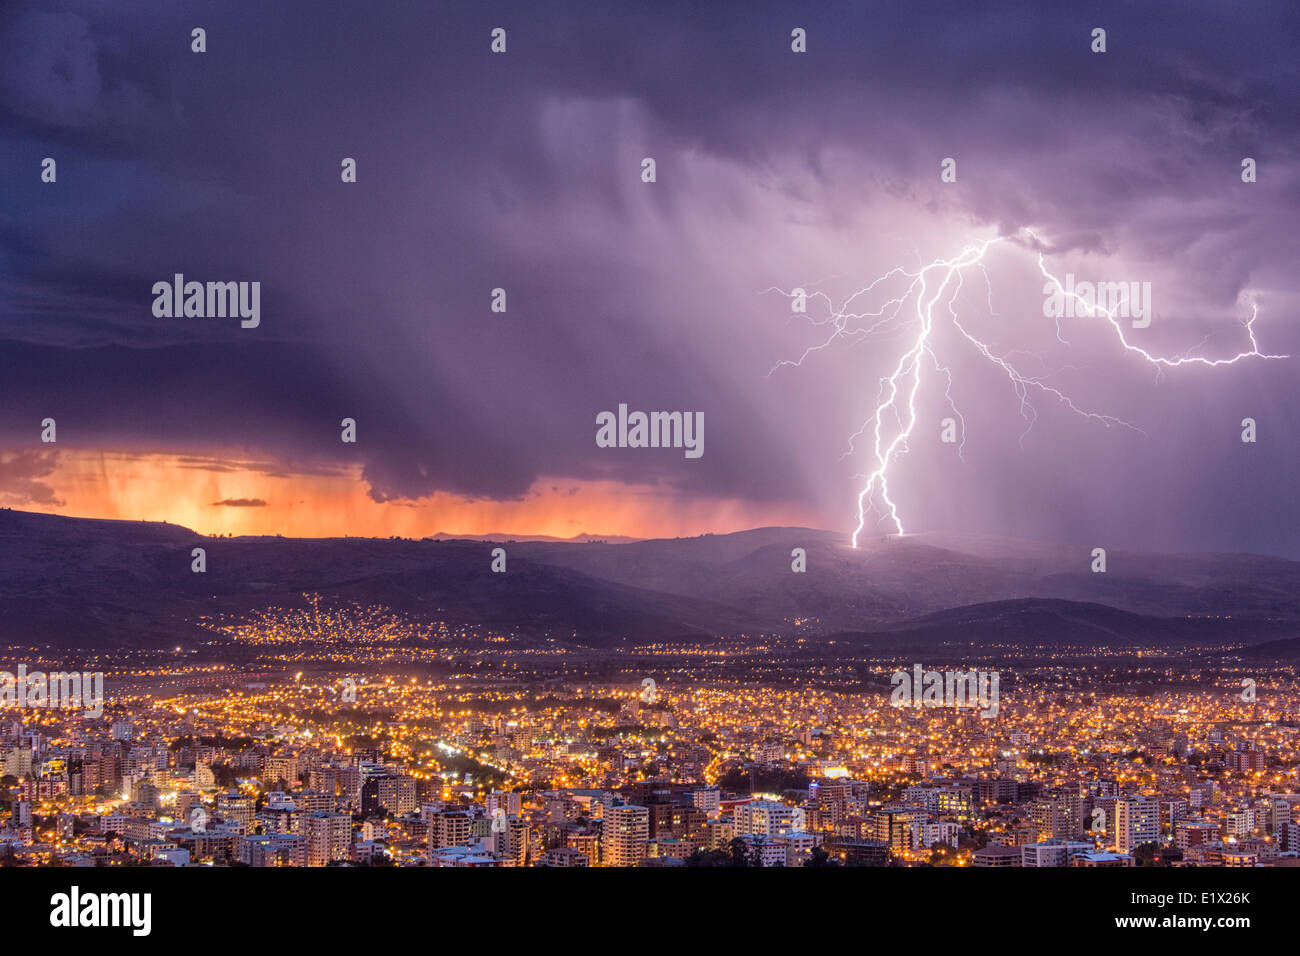 Lightning during a thunderstorm at sunset over the city of Cochabamba, Bolivia. Stock Photo